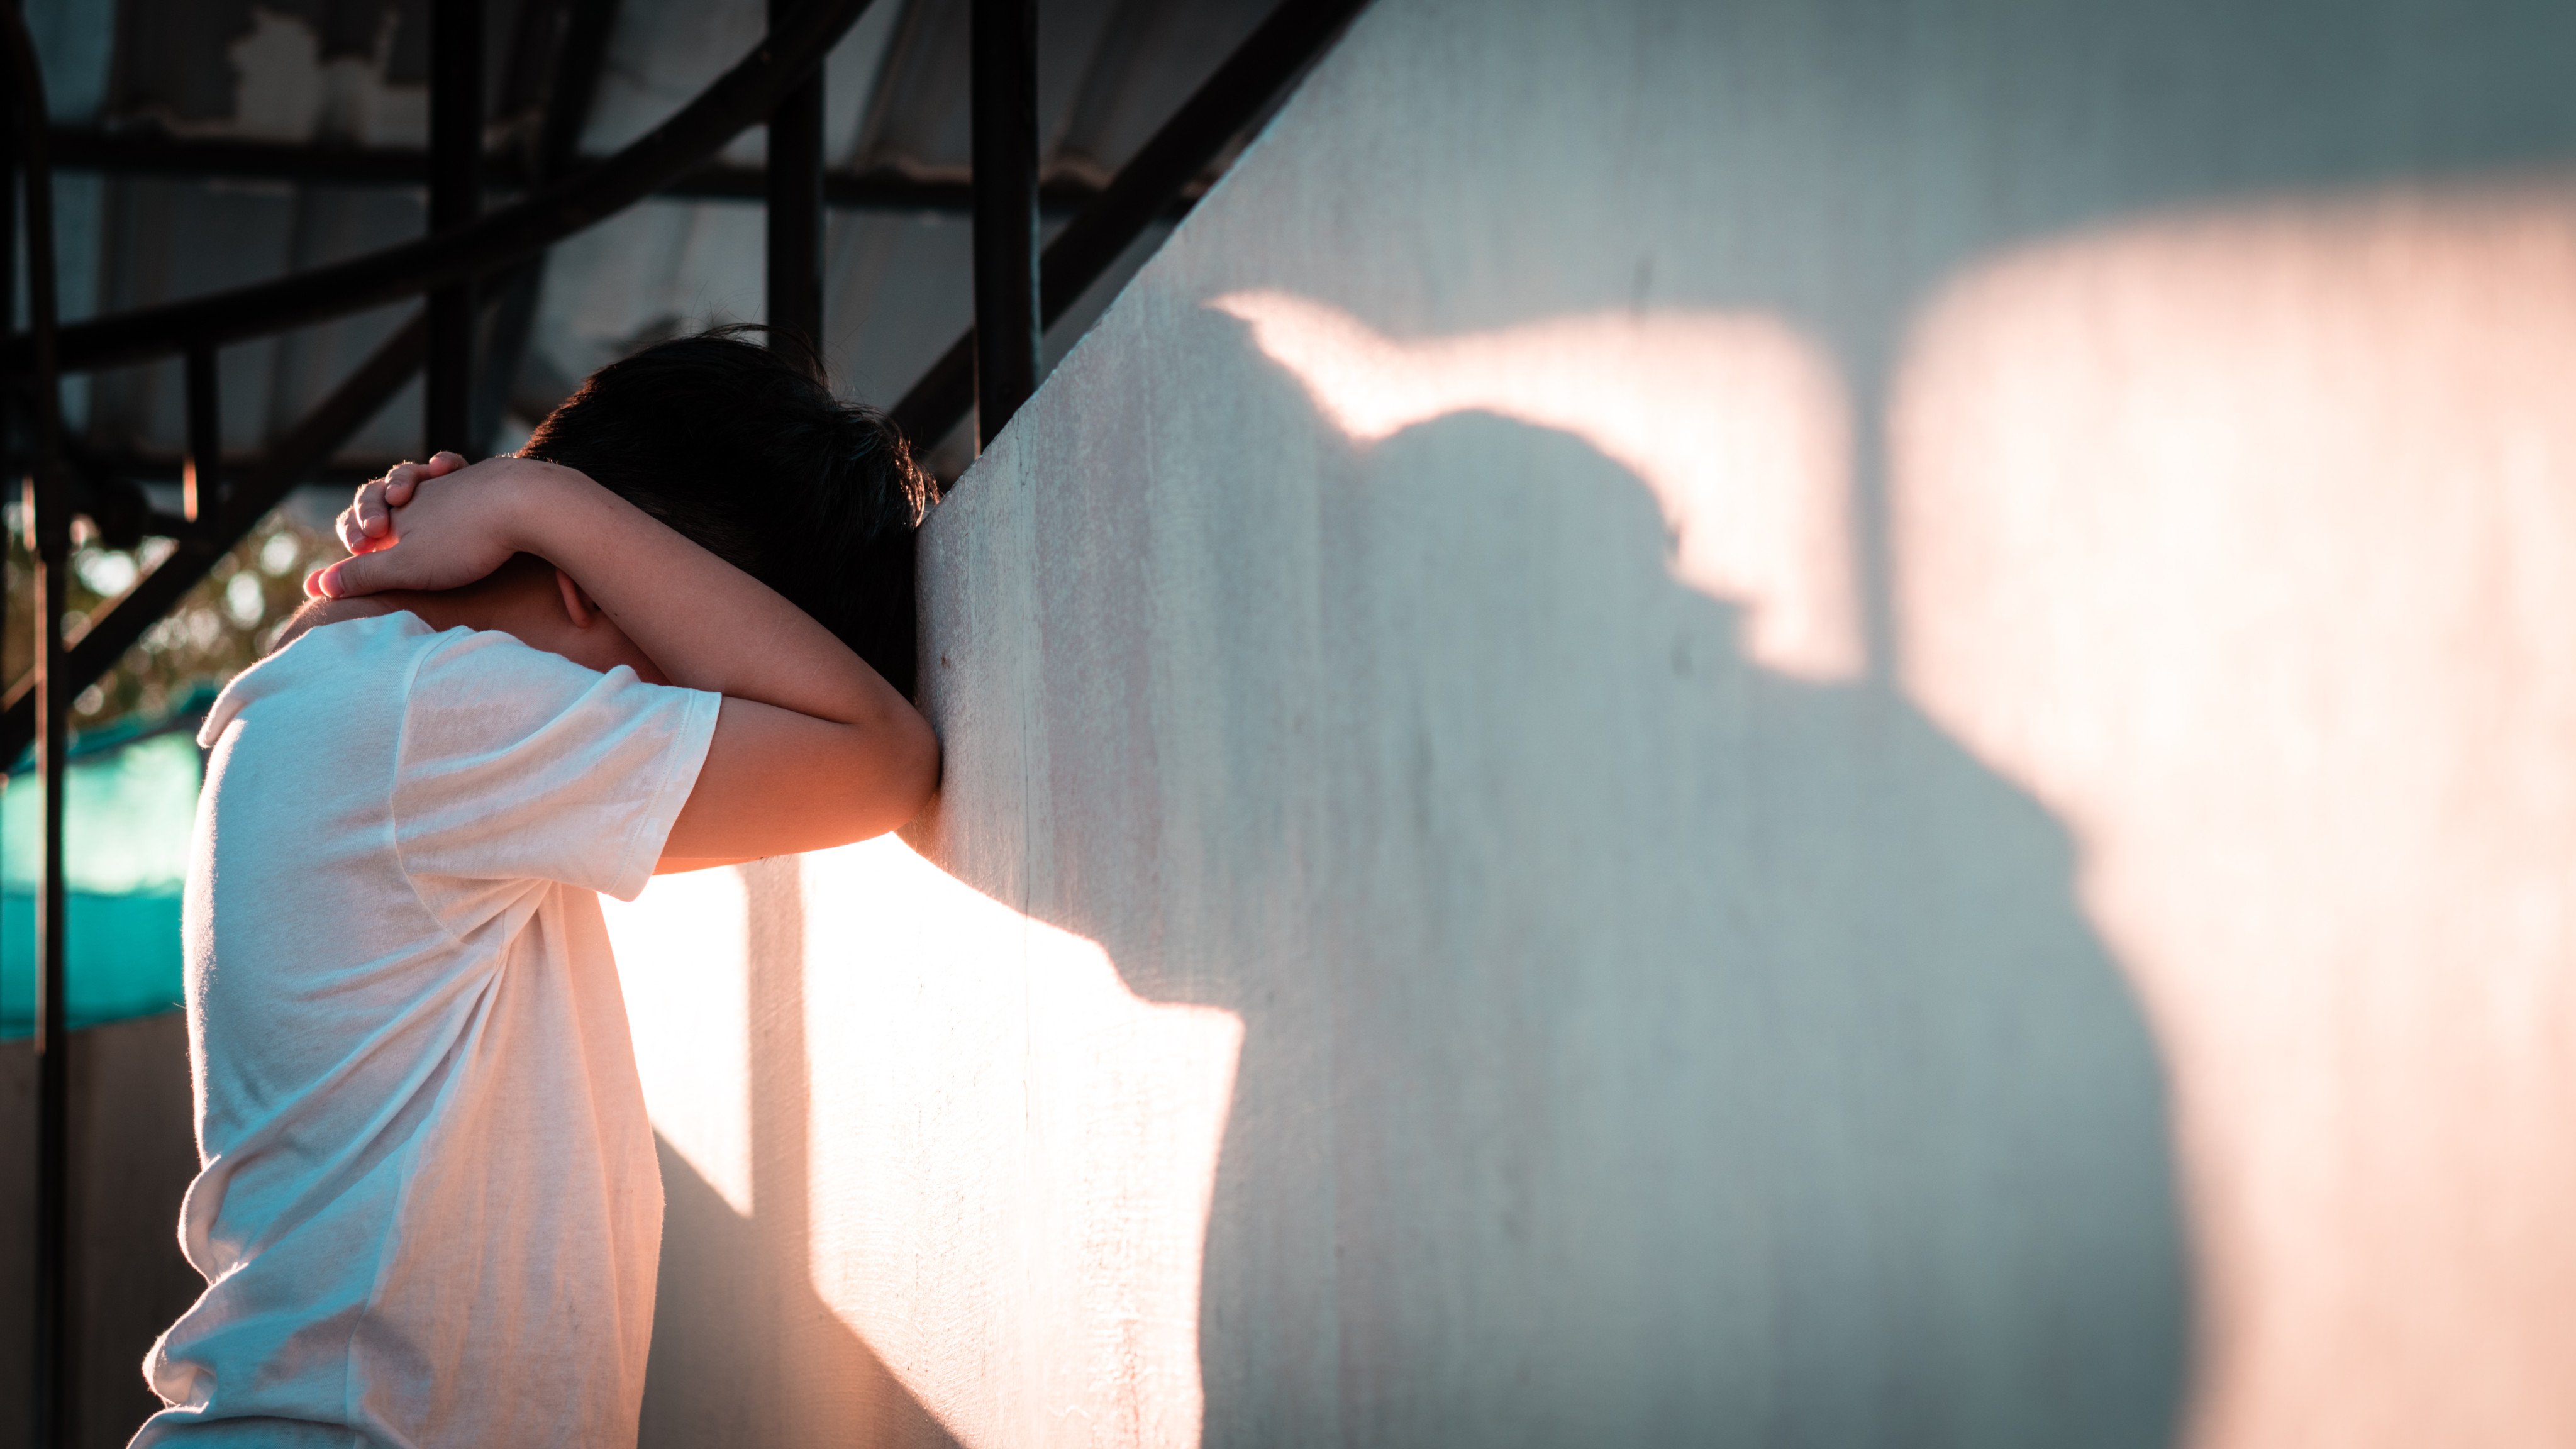 Many of Hong Kong’s youth have been struggling with their mental health in the wake of the Covid-19 pandemic. Photo: Shutterstock